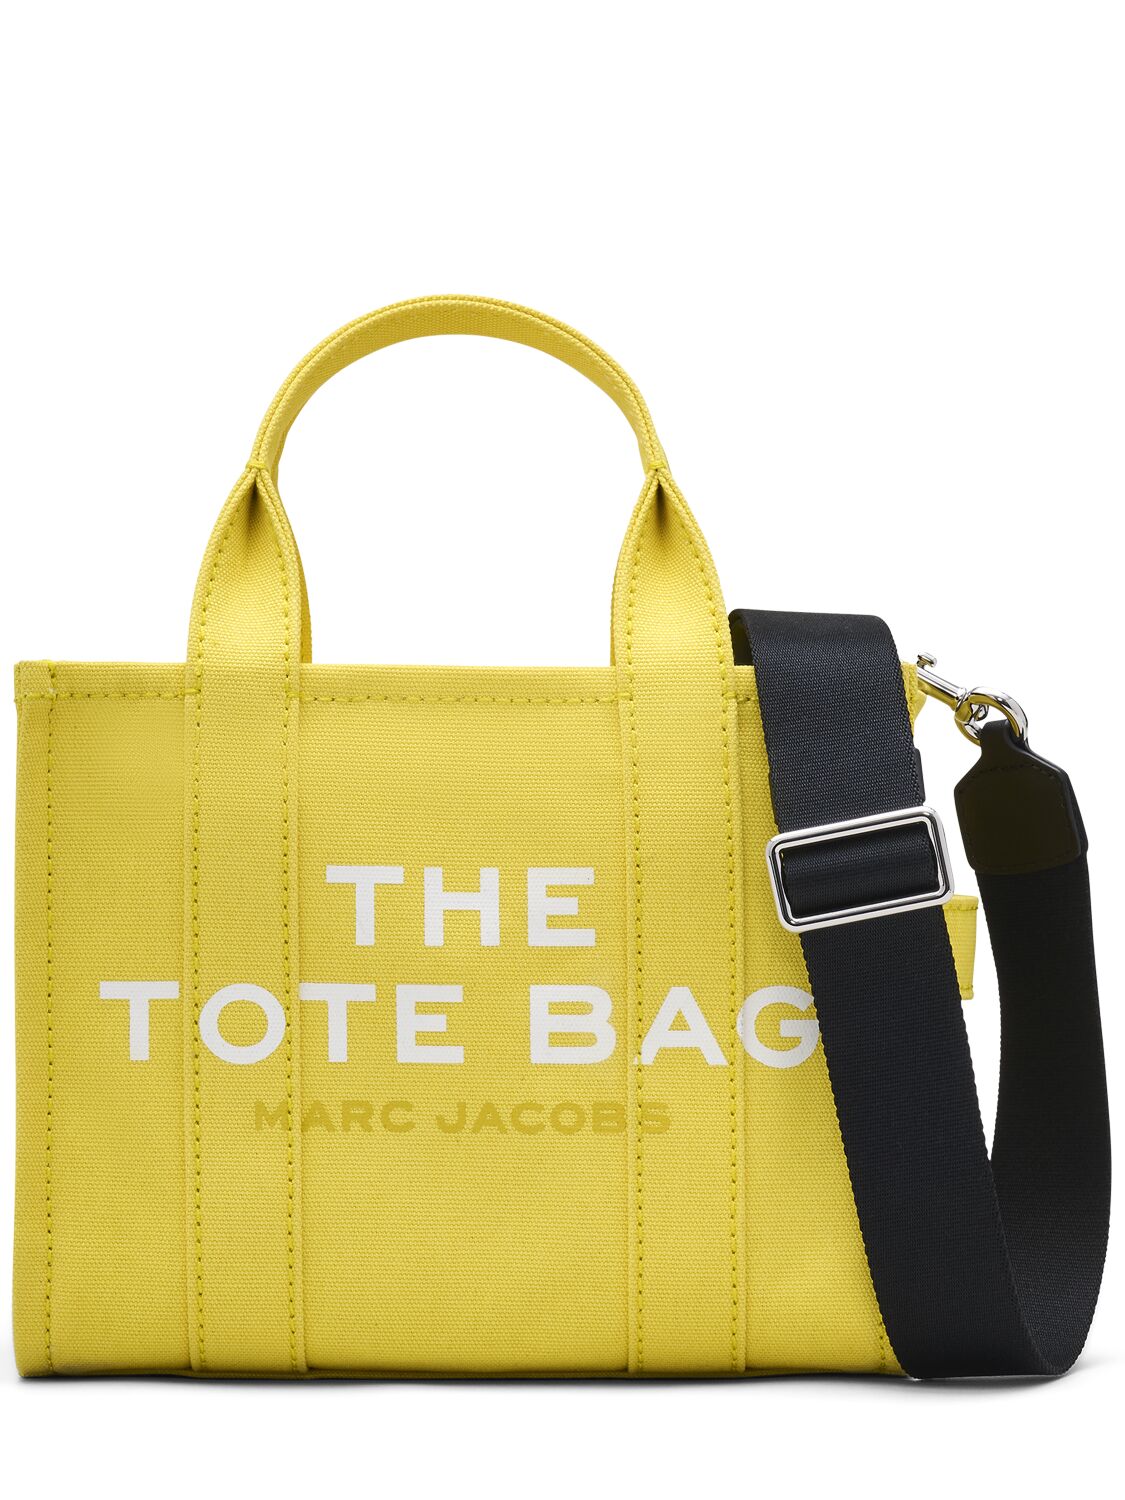 The Small Tote Canvas Bag